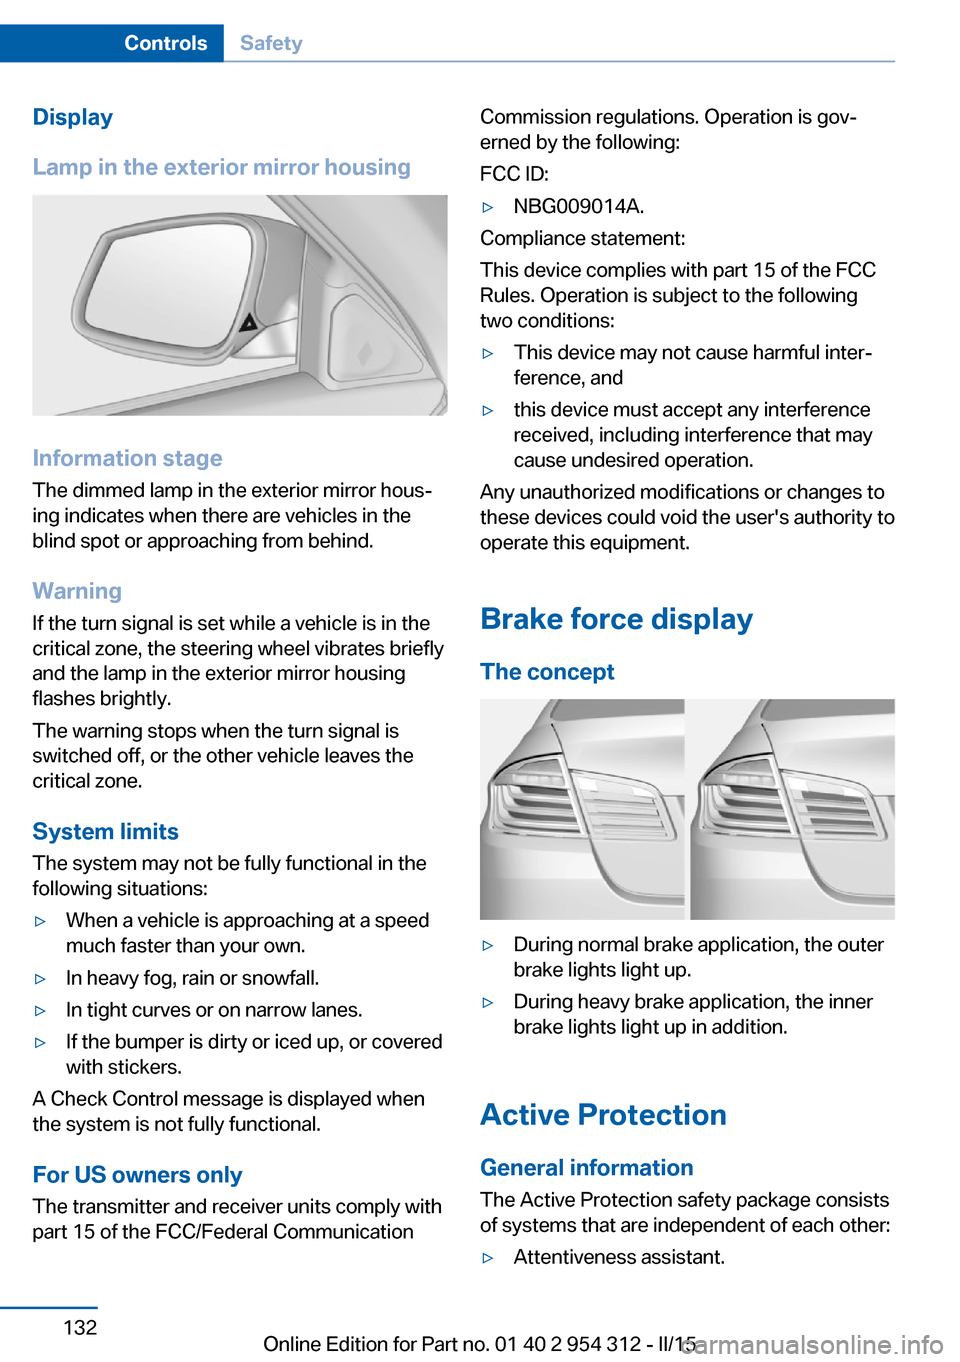 BMW 5 SERIES 2015 F10 Owners Guide Display
Lamp in the exterior mirror housing
Information stage
The dimmed lamp in the exterior mirror hous‐
ing indicates when there are vehicles in the
blind spot or approaching from behind.
Warning